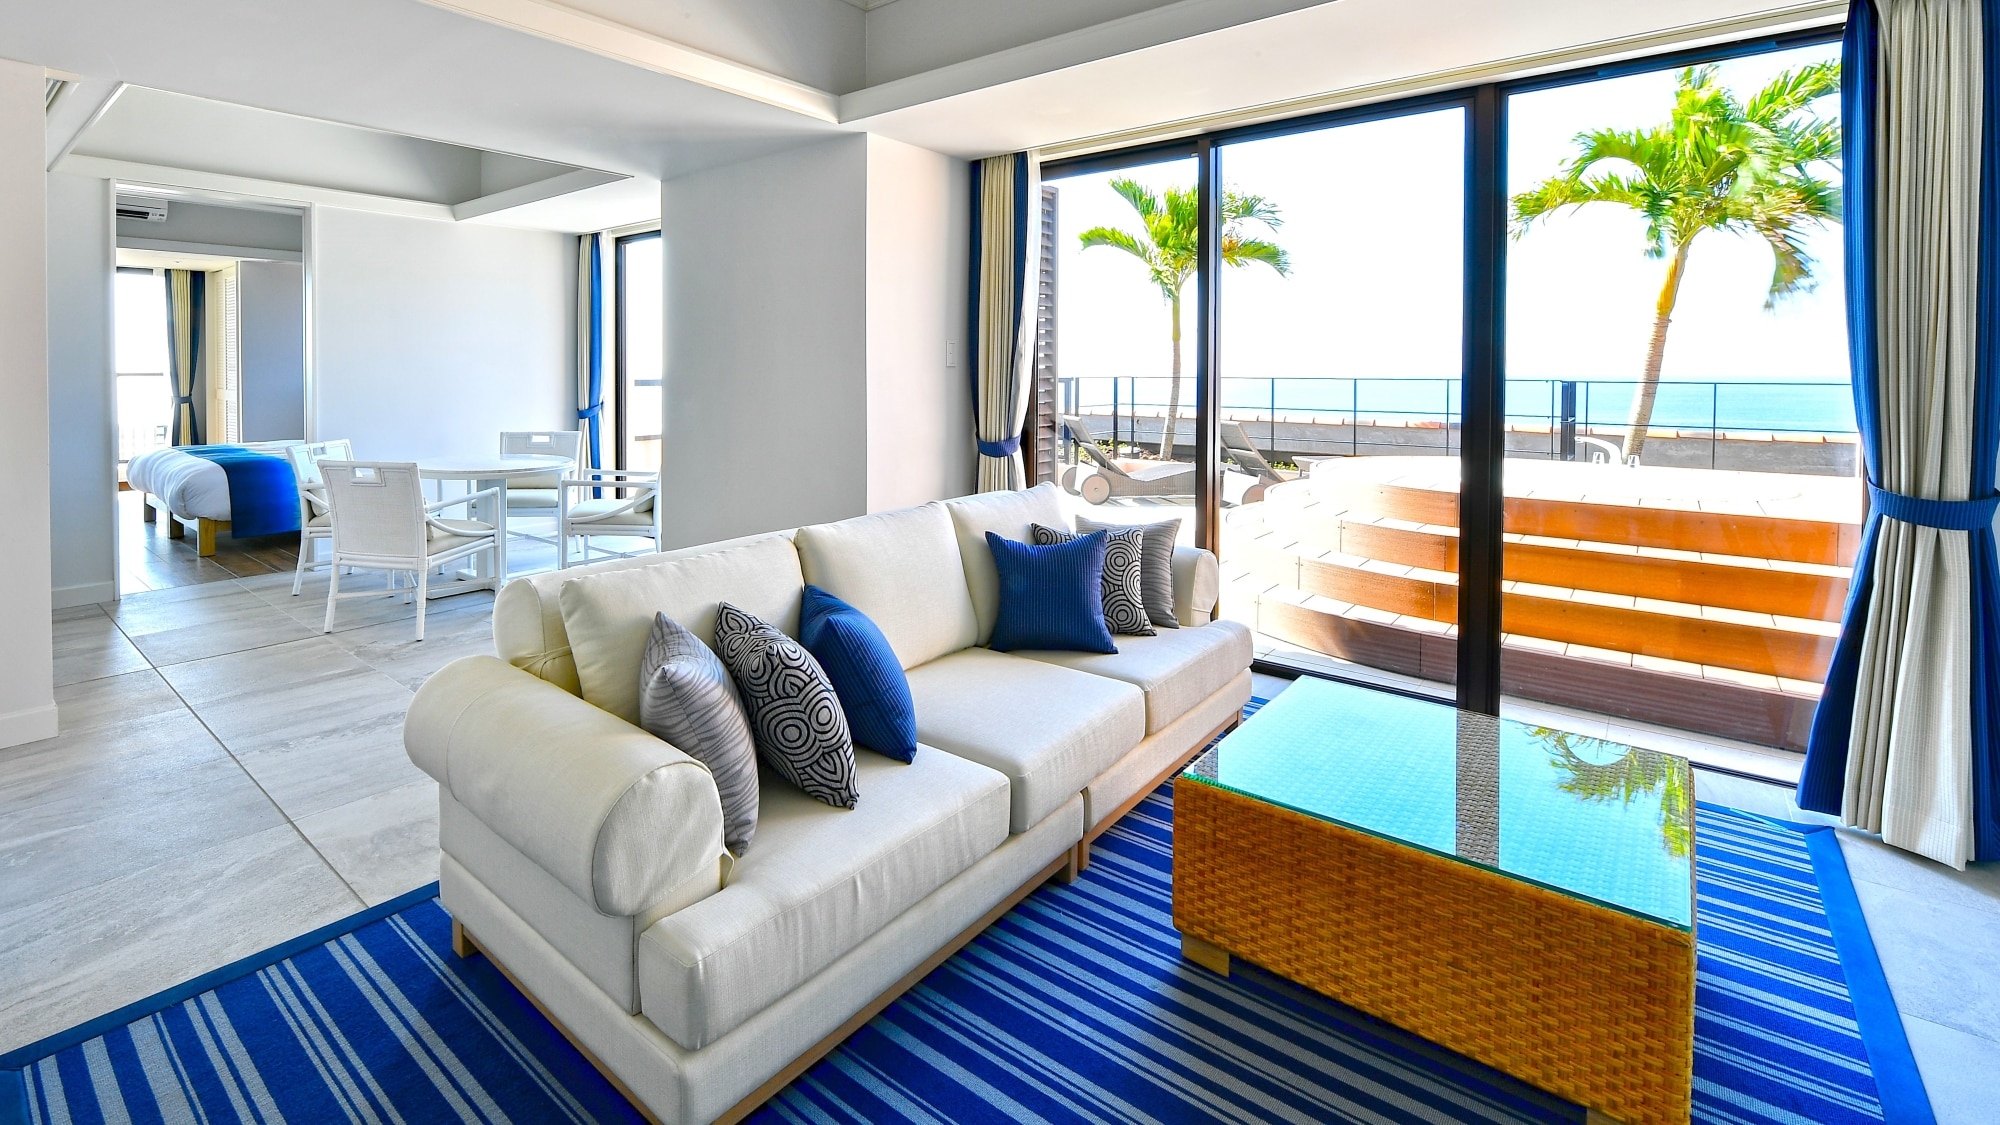 [Bayside/Deluxe Suite 2 Bedroom] Living room where you can enjoy the ocean view